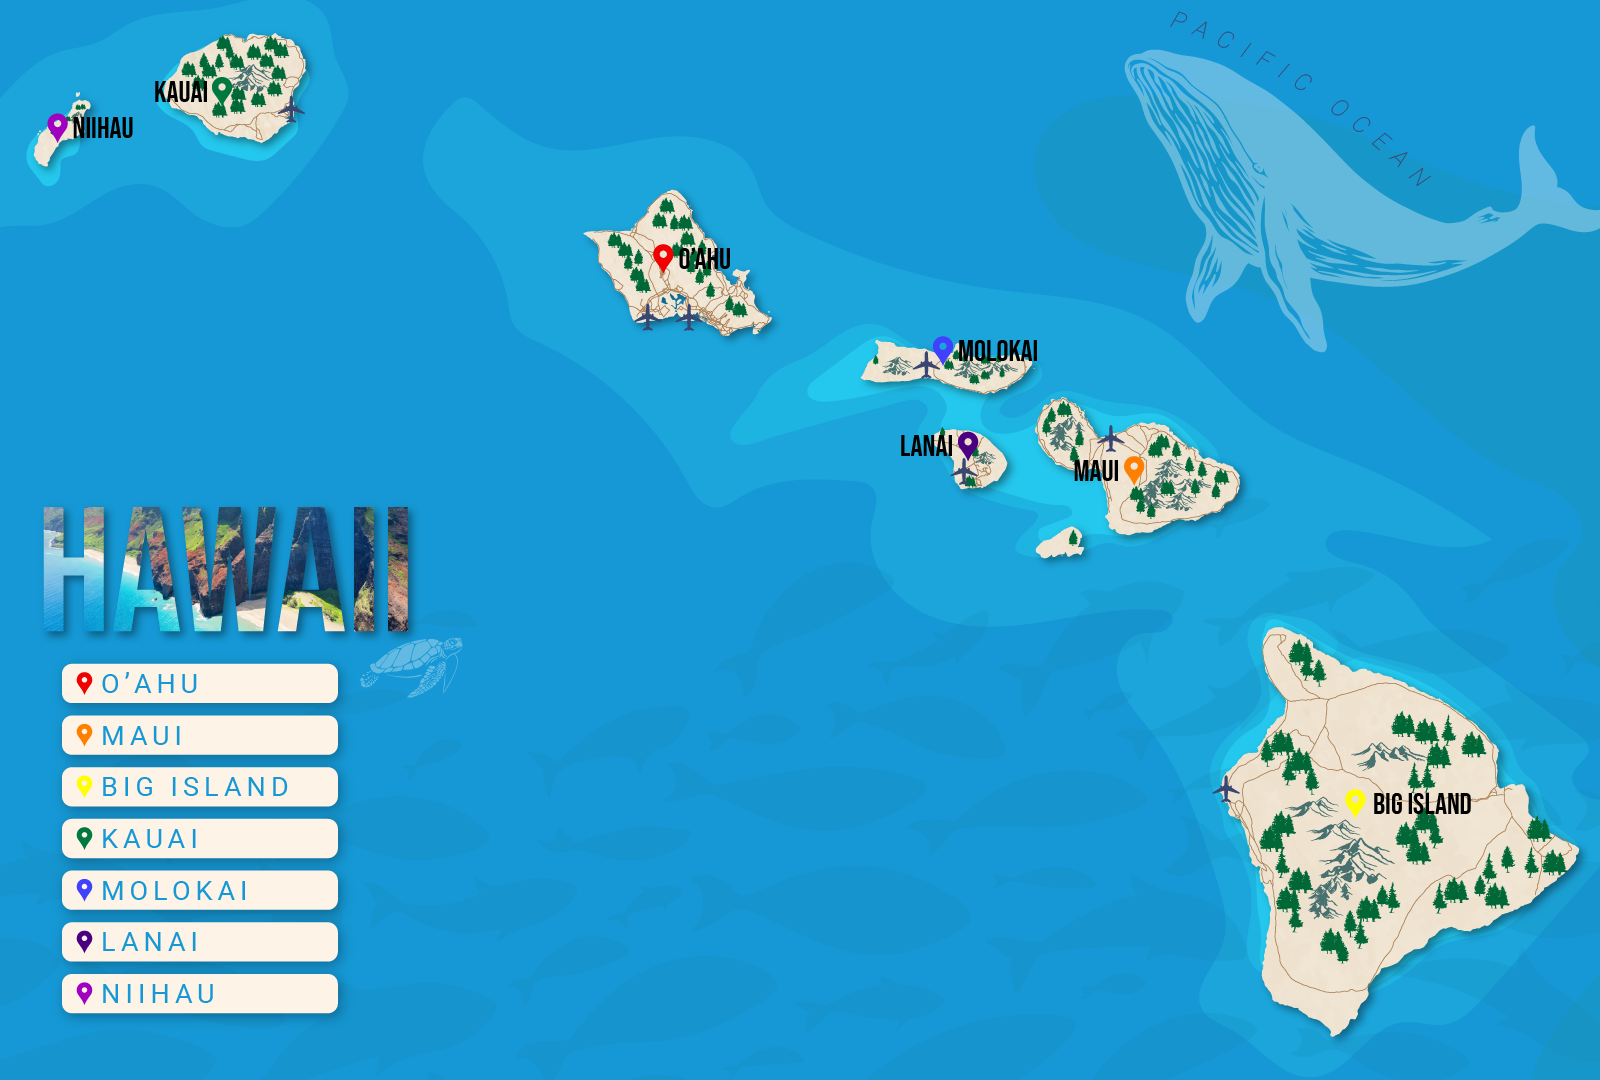 Custom map of the Hawaiian islands in graphic form with the 7 islands labeled for a piece on where to stay in Hawaii